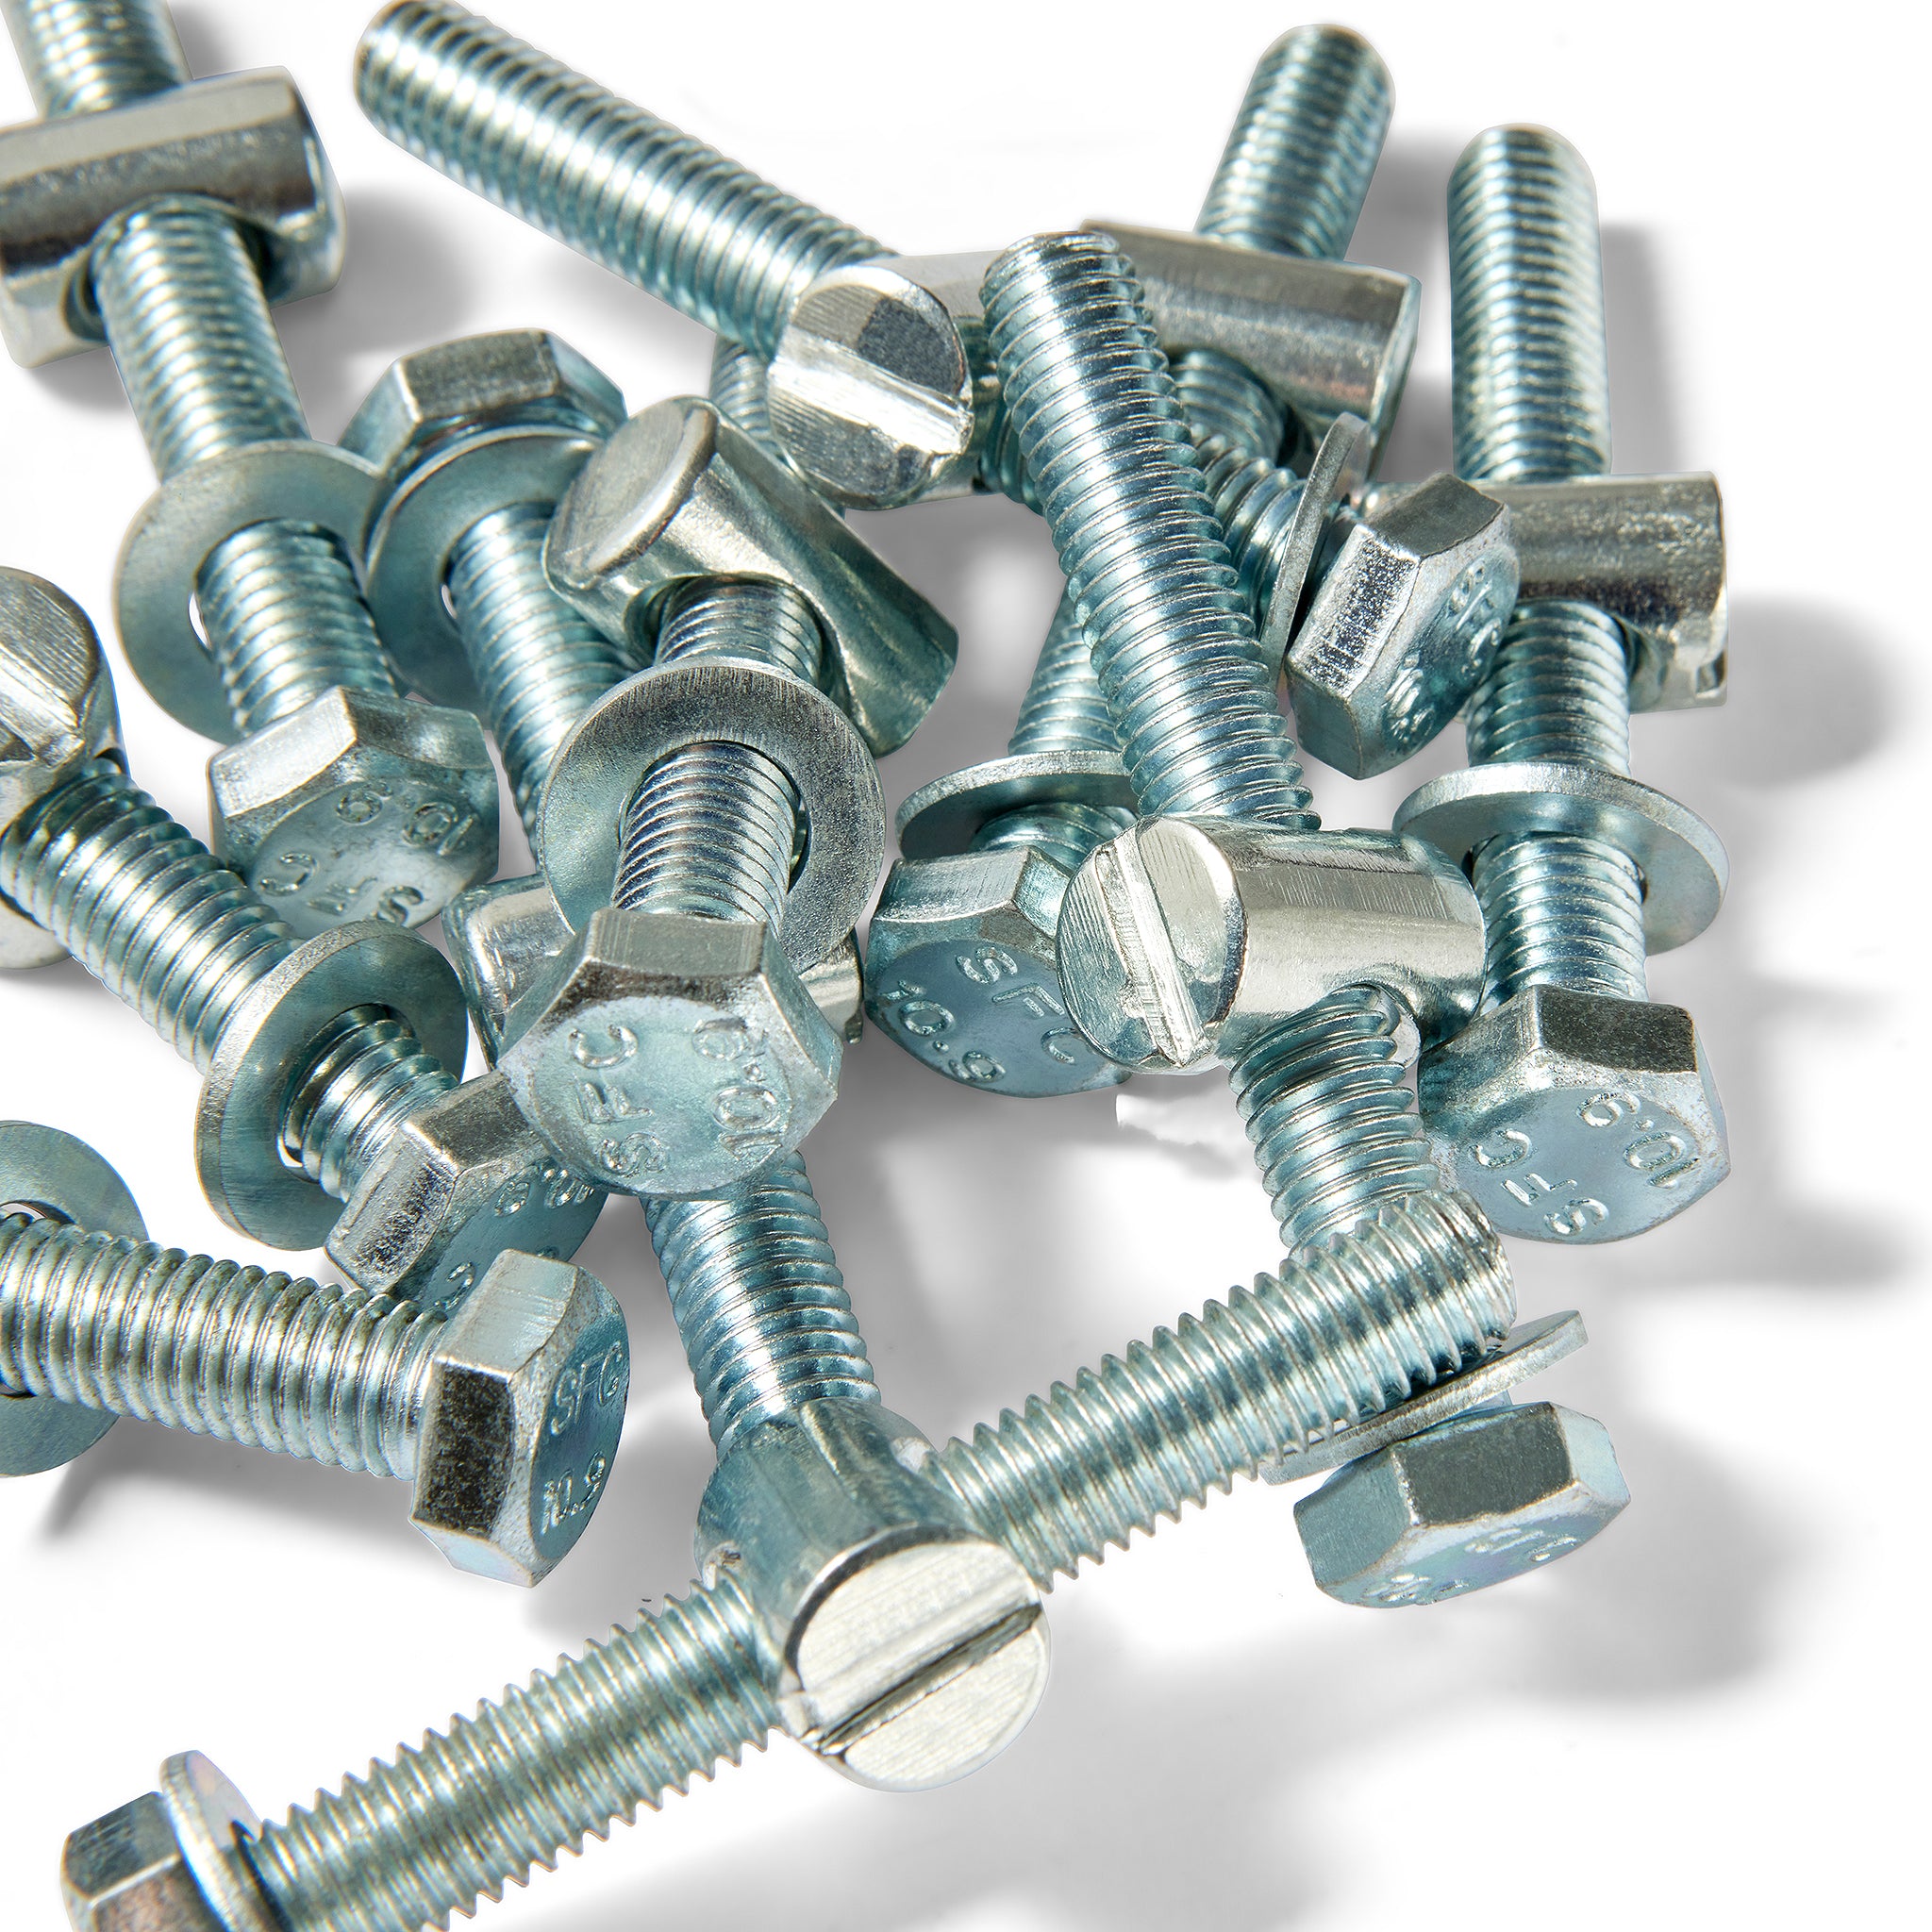 Cross Dowels and Connector Bolts - Pack of 30